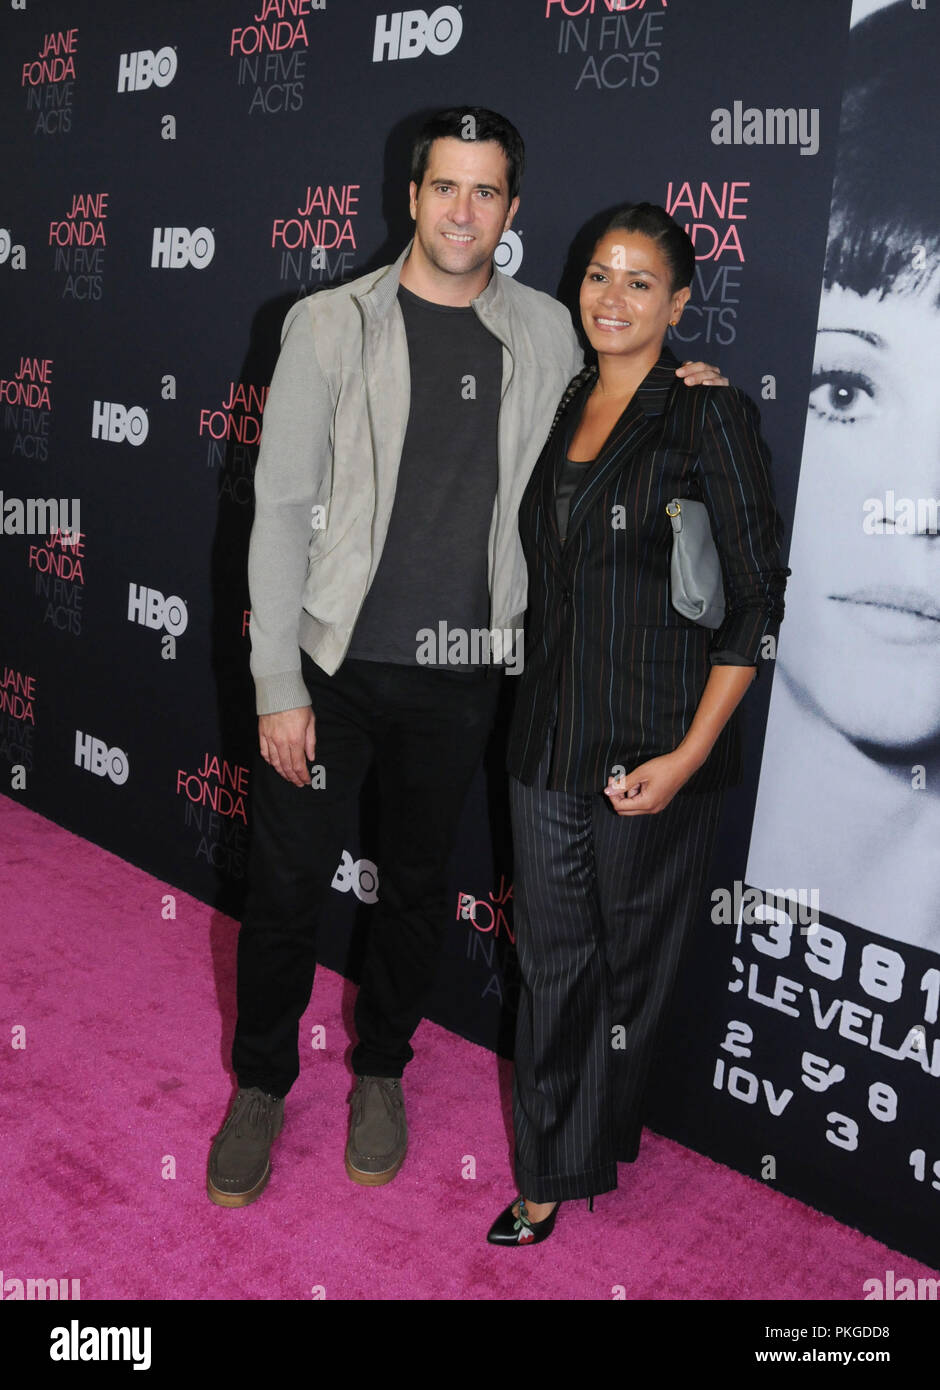 Los Angeles, USA. 13th Sep 2018. Actor Troy Garity and wife Simone Bent attend HBO Presents The Los Angeles Premiere of the HBO Documentary Film 'Jane Fonda In Five Acts' on September 13, 2018 at Hammer Museum in Los Angeles, California. Photo by Barry King/Alamy Live News Stock Photo